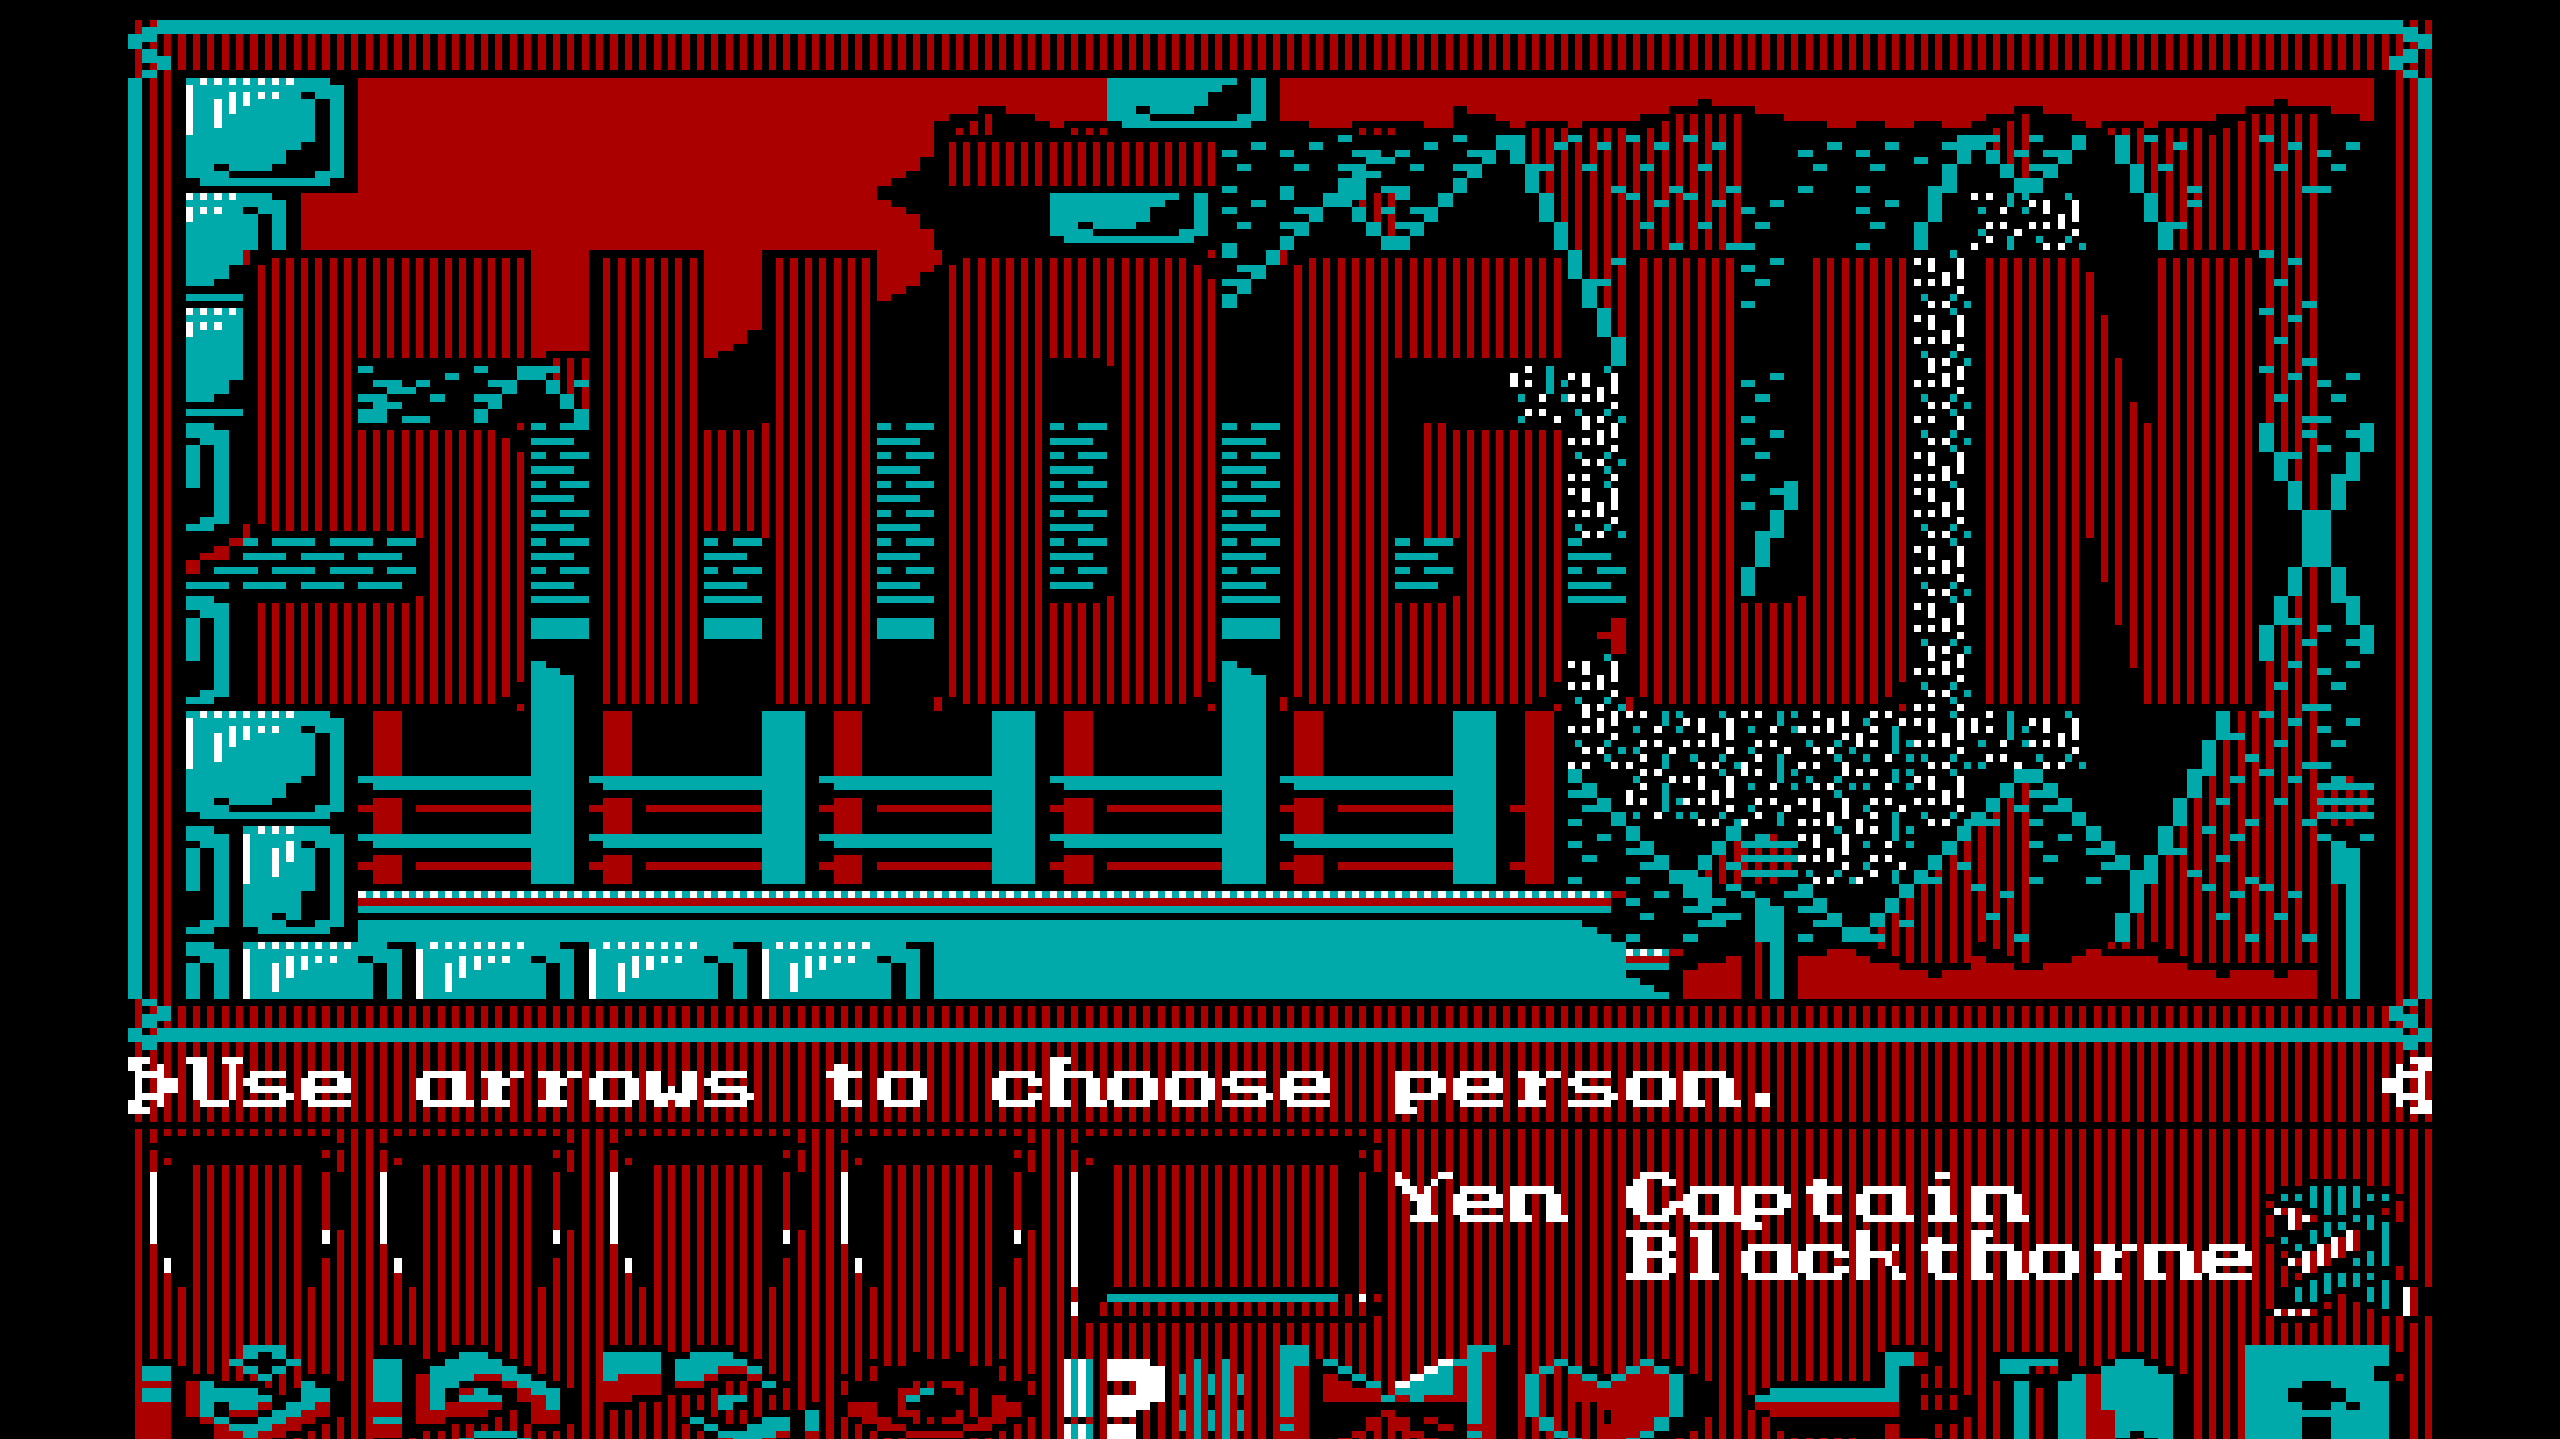 The title screen for Mastertronics' Shogun game from 1986.